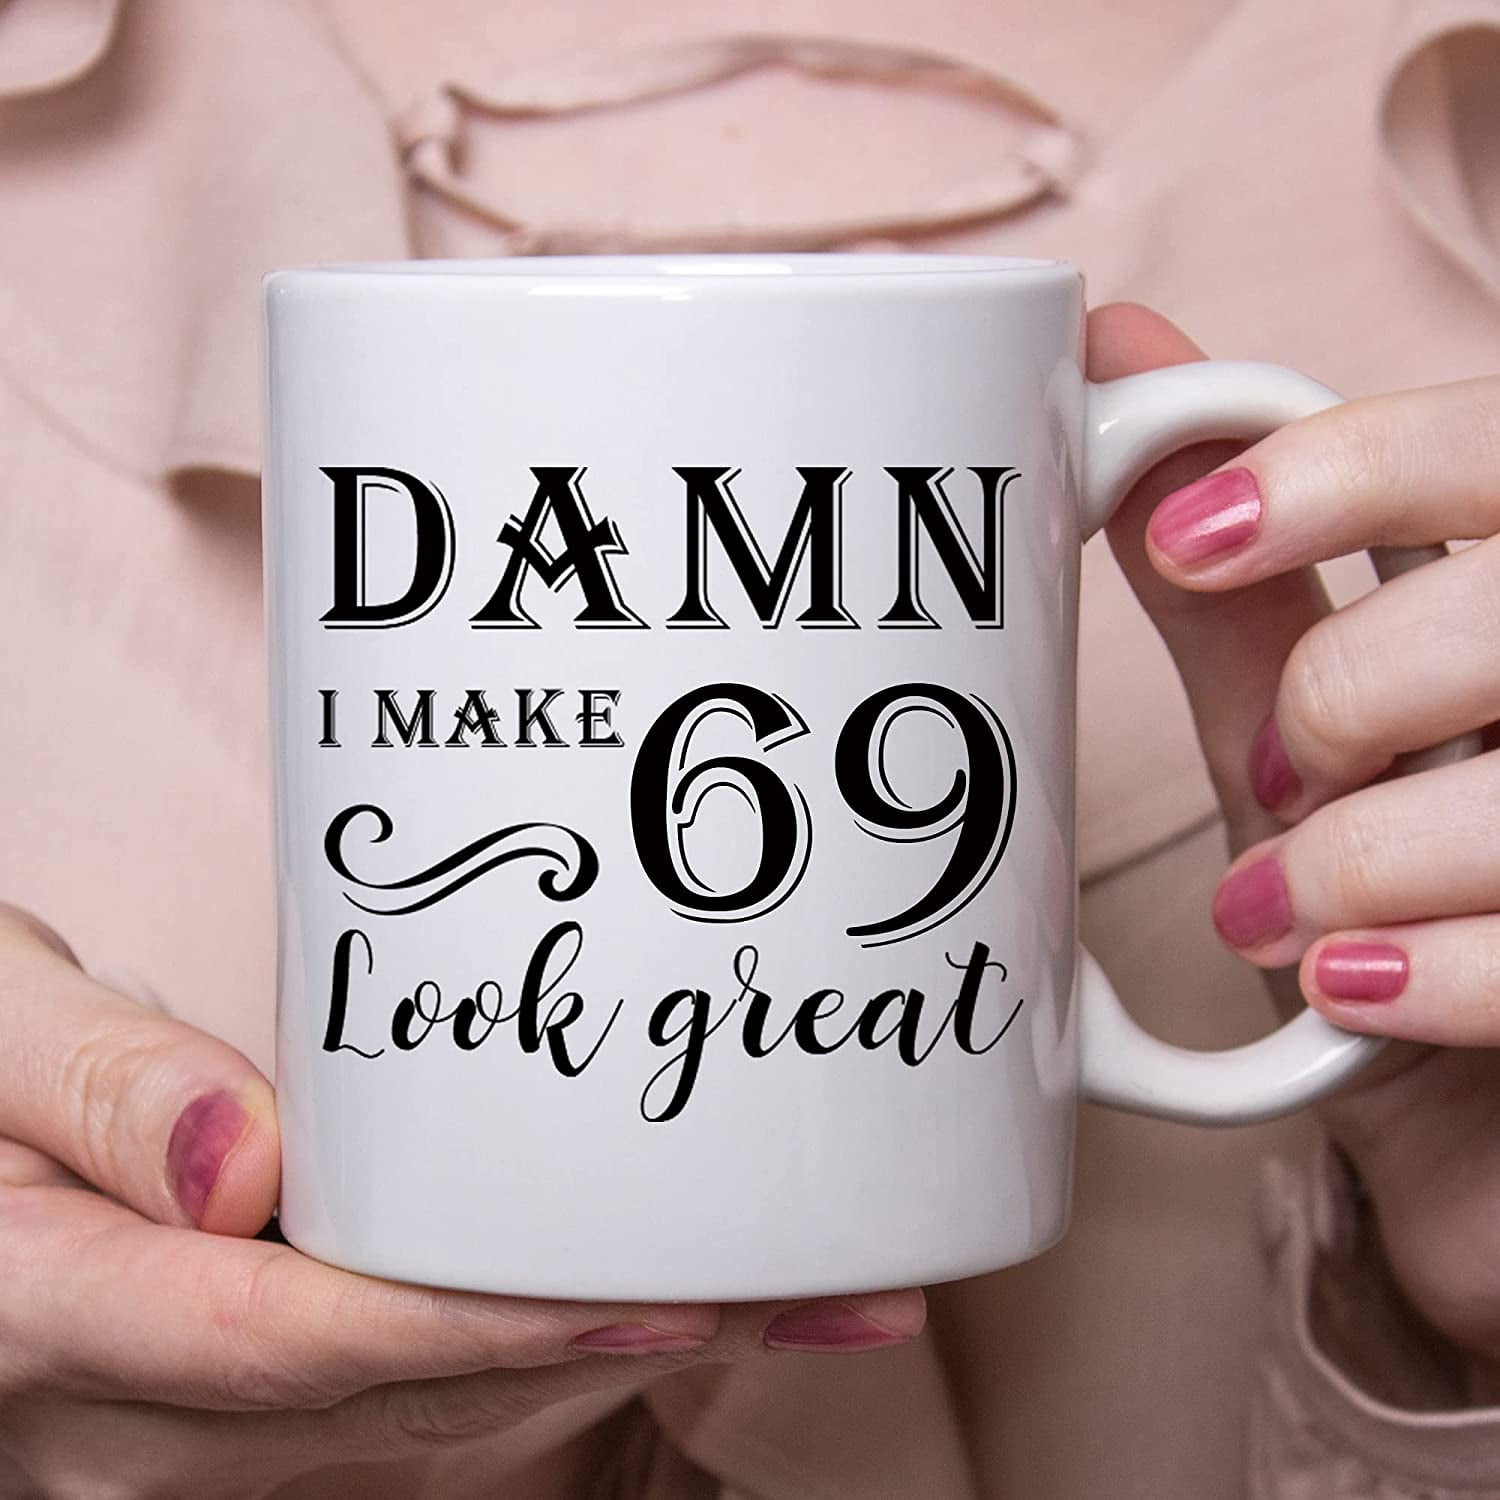 69 Unique Gifts for the Woman Who Has Everything - Parade